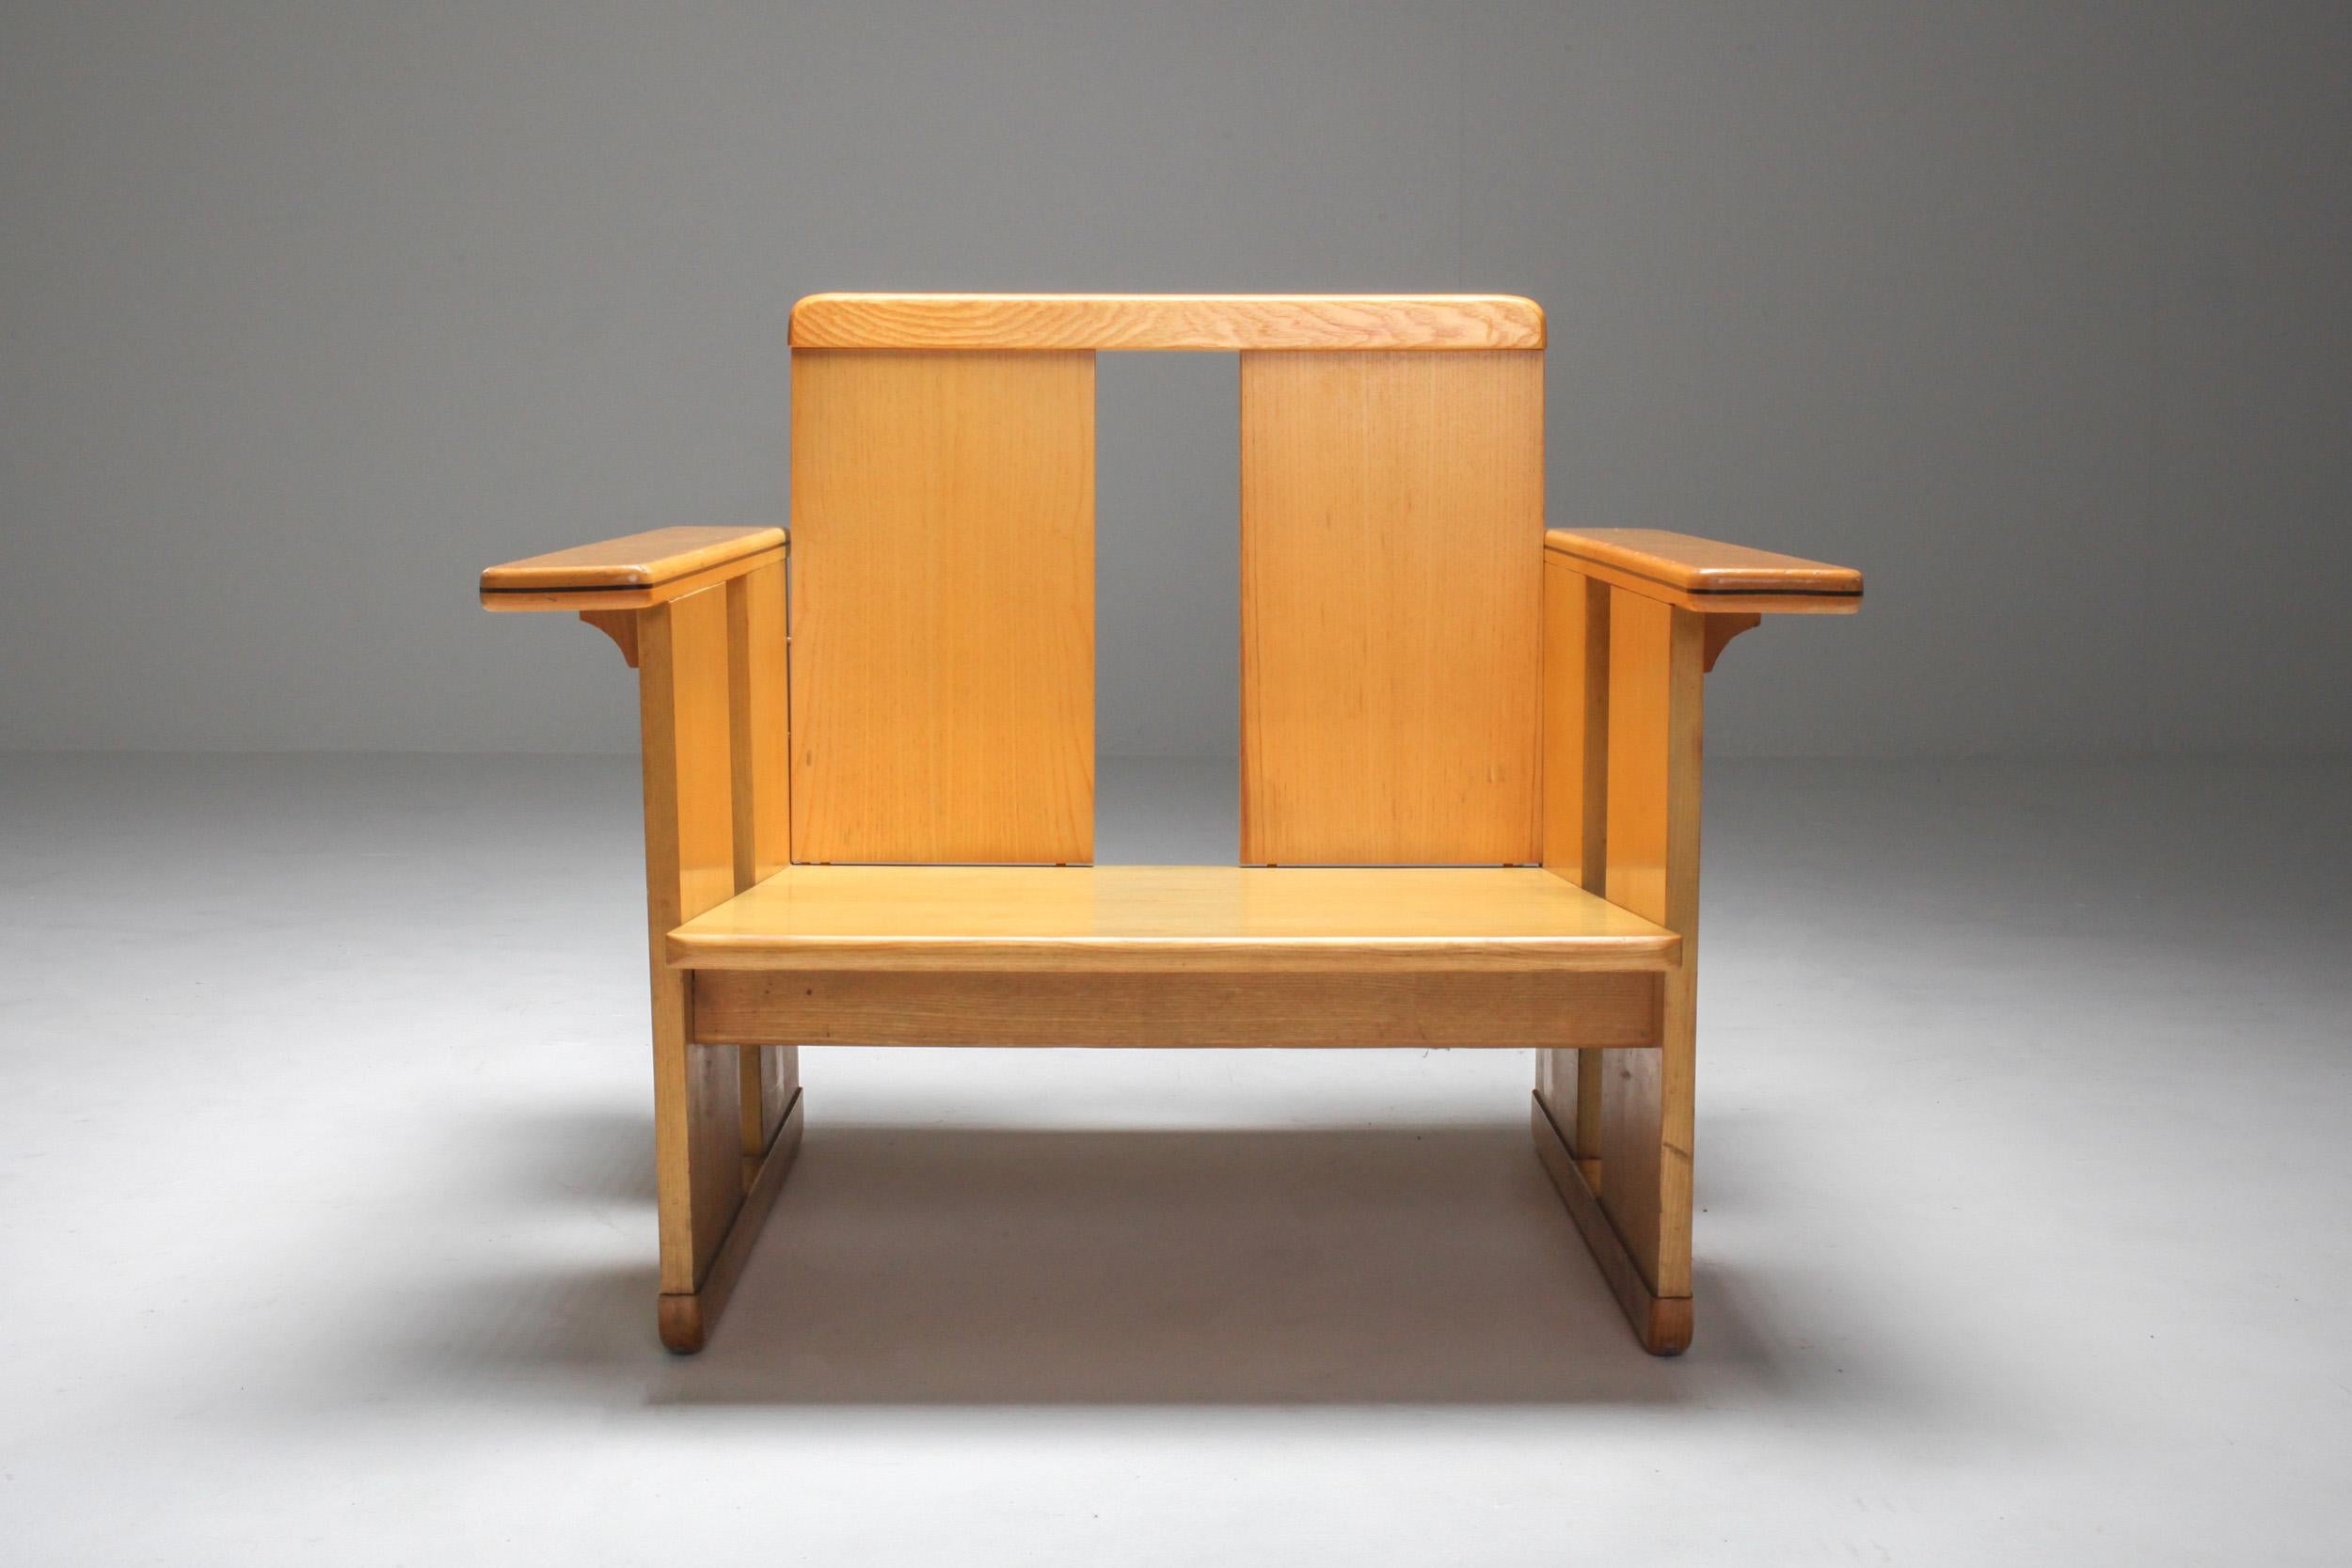 Scarpa, crate chairs, artona series, Maxalto, Italy, 1970s.

Post-modern armchairs by the famous children of Carlo Scarpa.
Inspired by Donald Judd and Rietveld, Afra e Tobia Scarpa designed these minimalist pieces in Italian pinus.
  